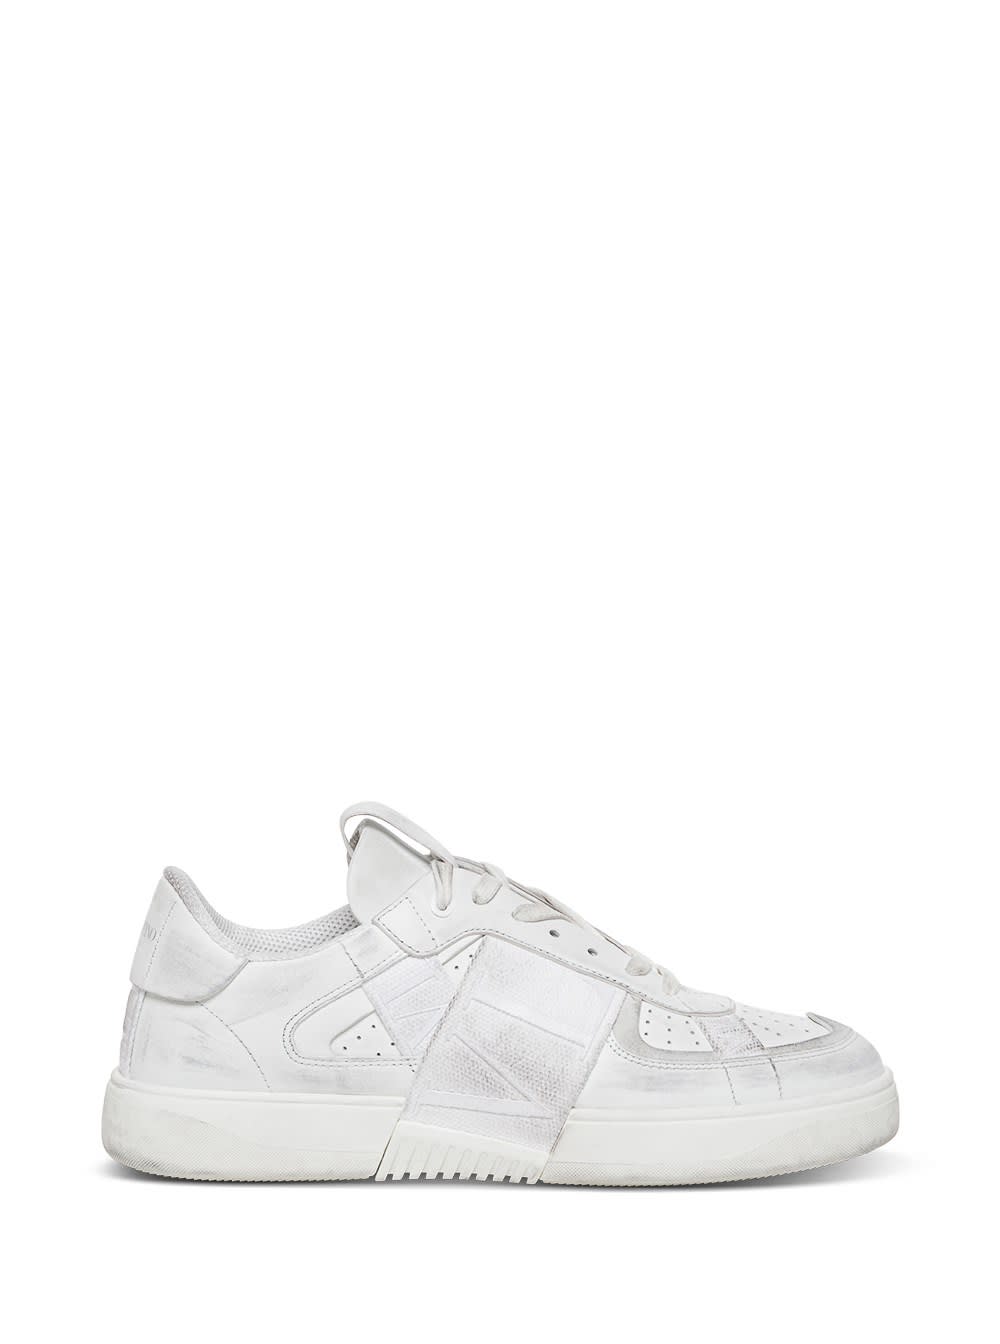 VALENTINO GARAVANI VL7N SNEAKERS IN LEATHER AND FABRIC,VY0S0C58JTV10K